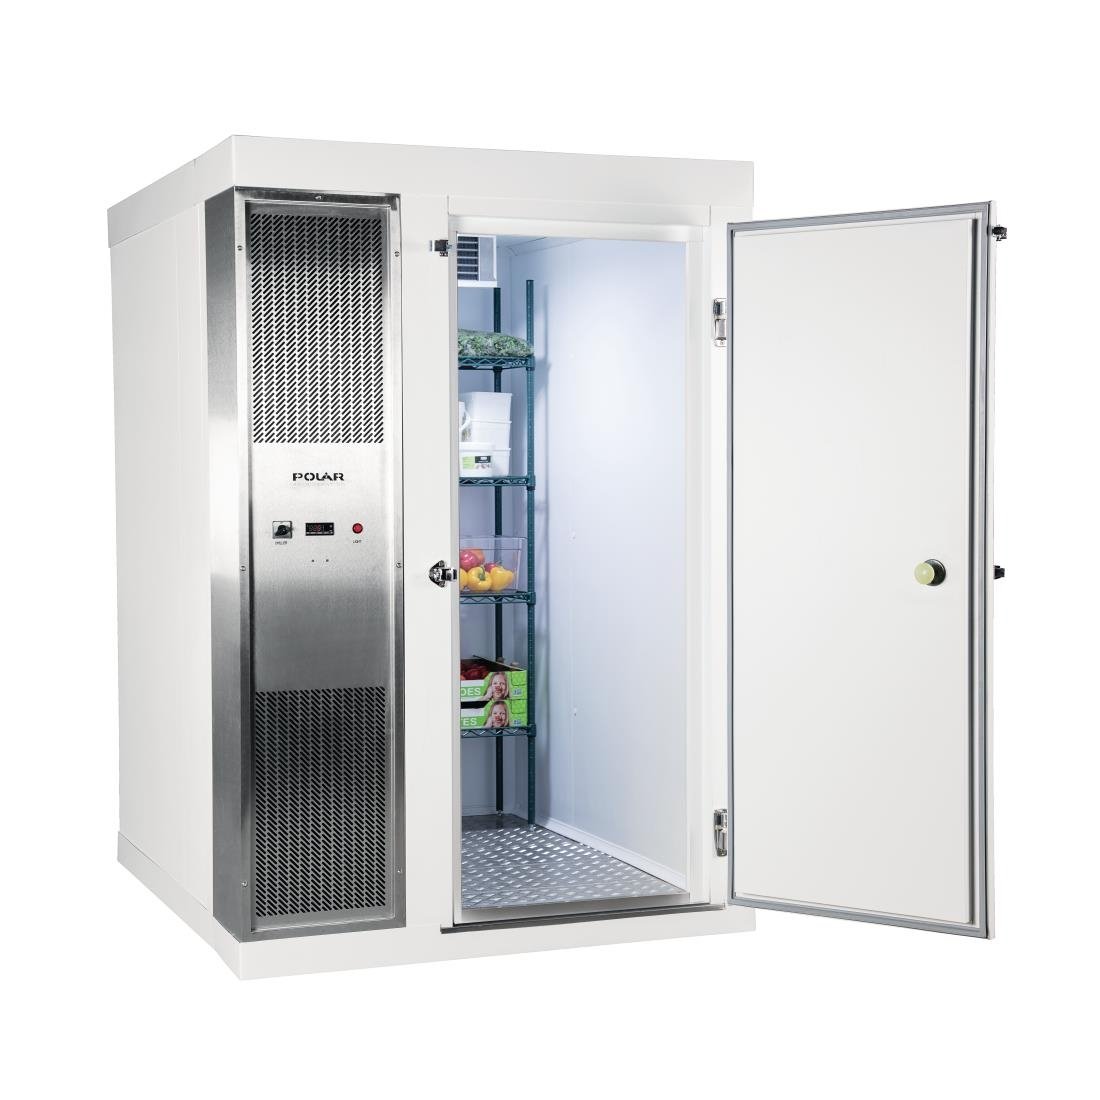 DS481-CWH Polar U-Series 1.5 x 1.2m Integral Walk In Cold Room White JD Catering Equipment Solutions Ltd